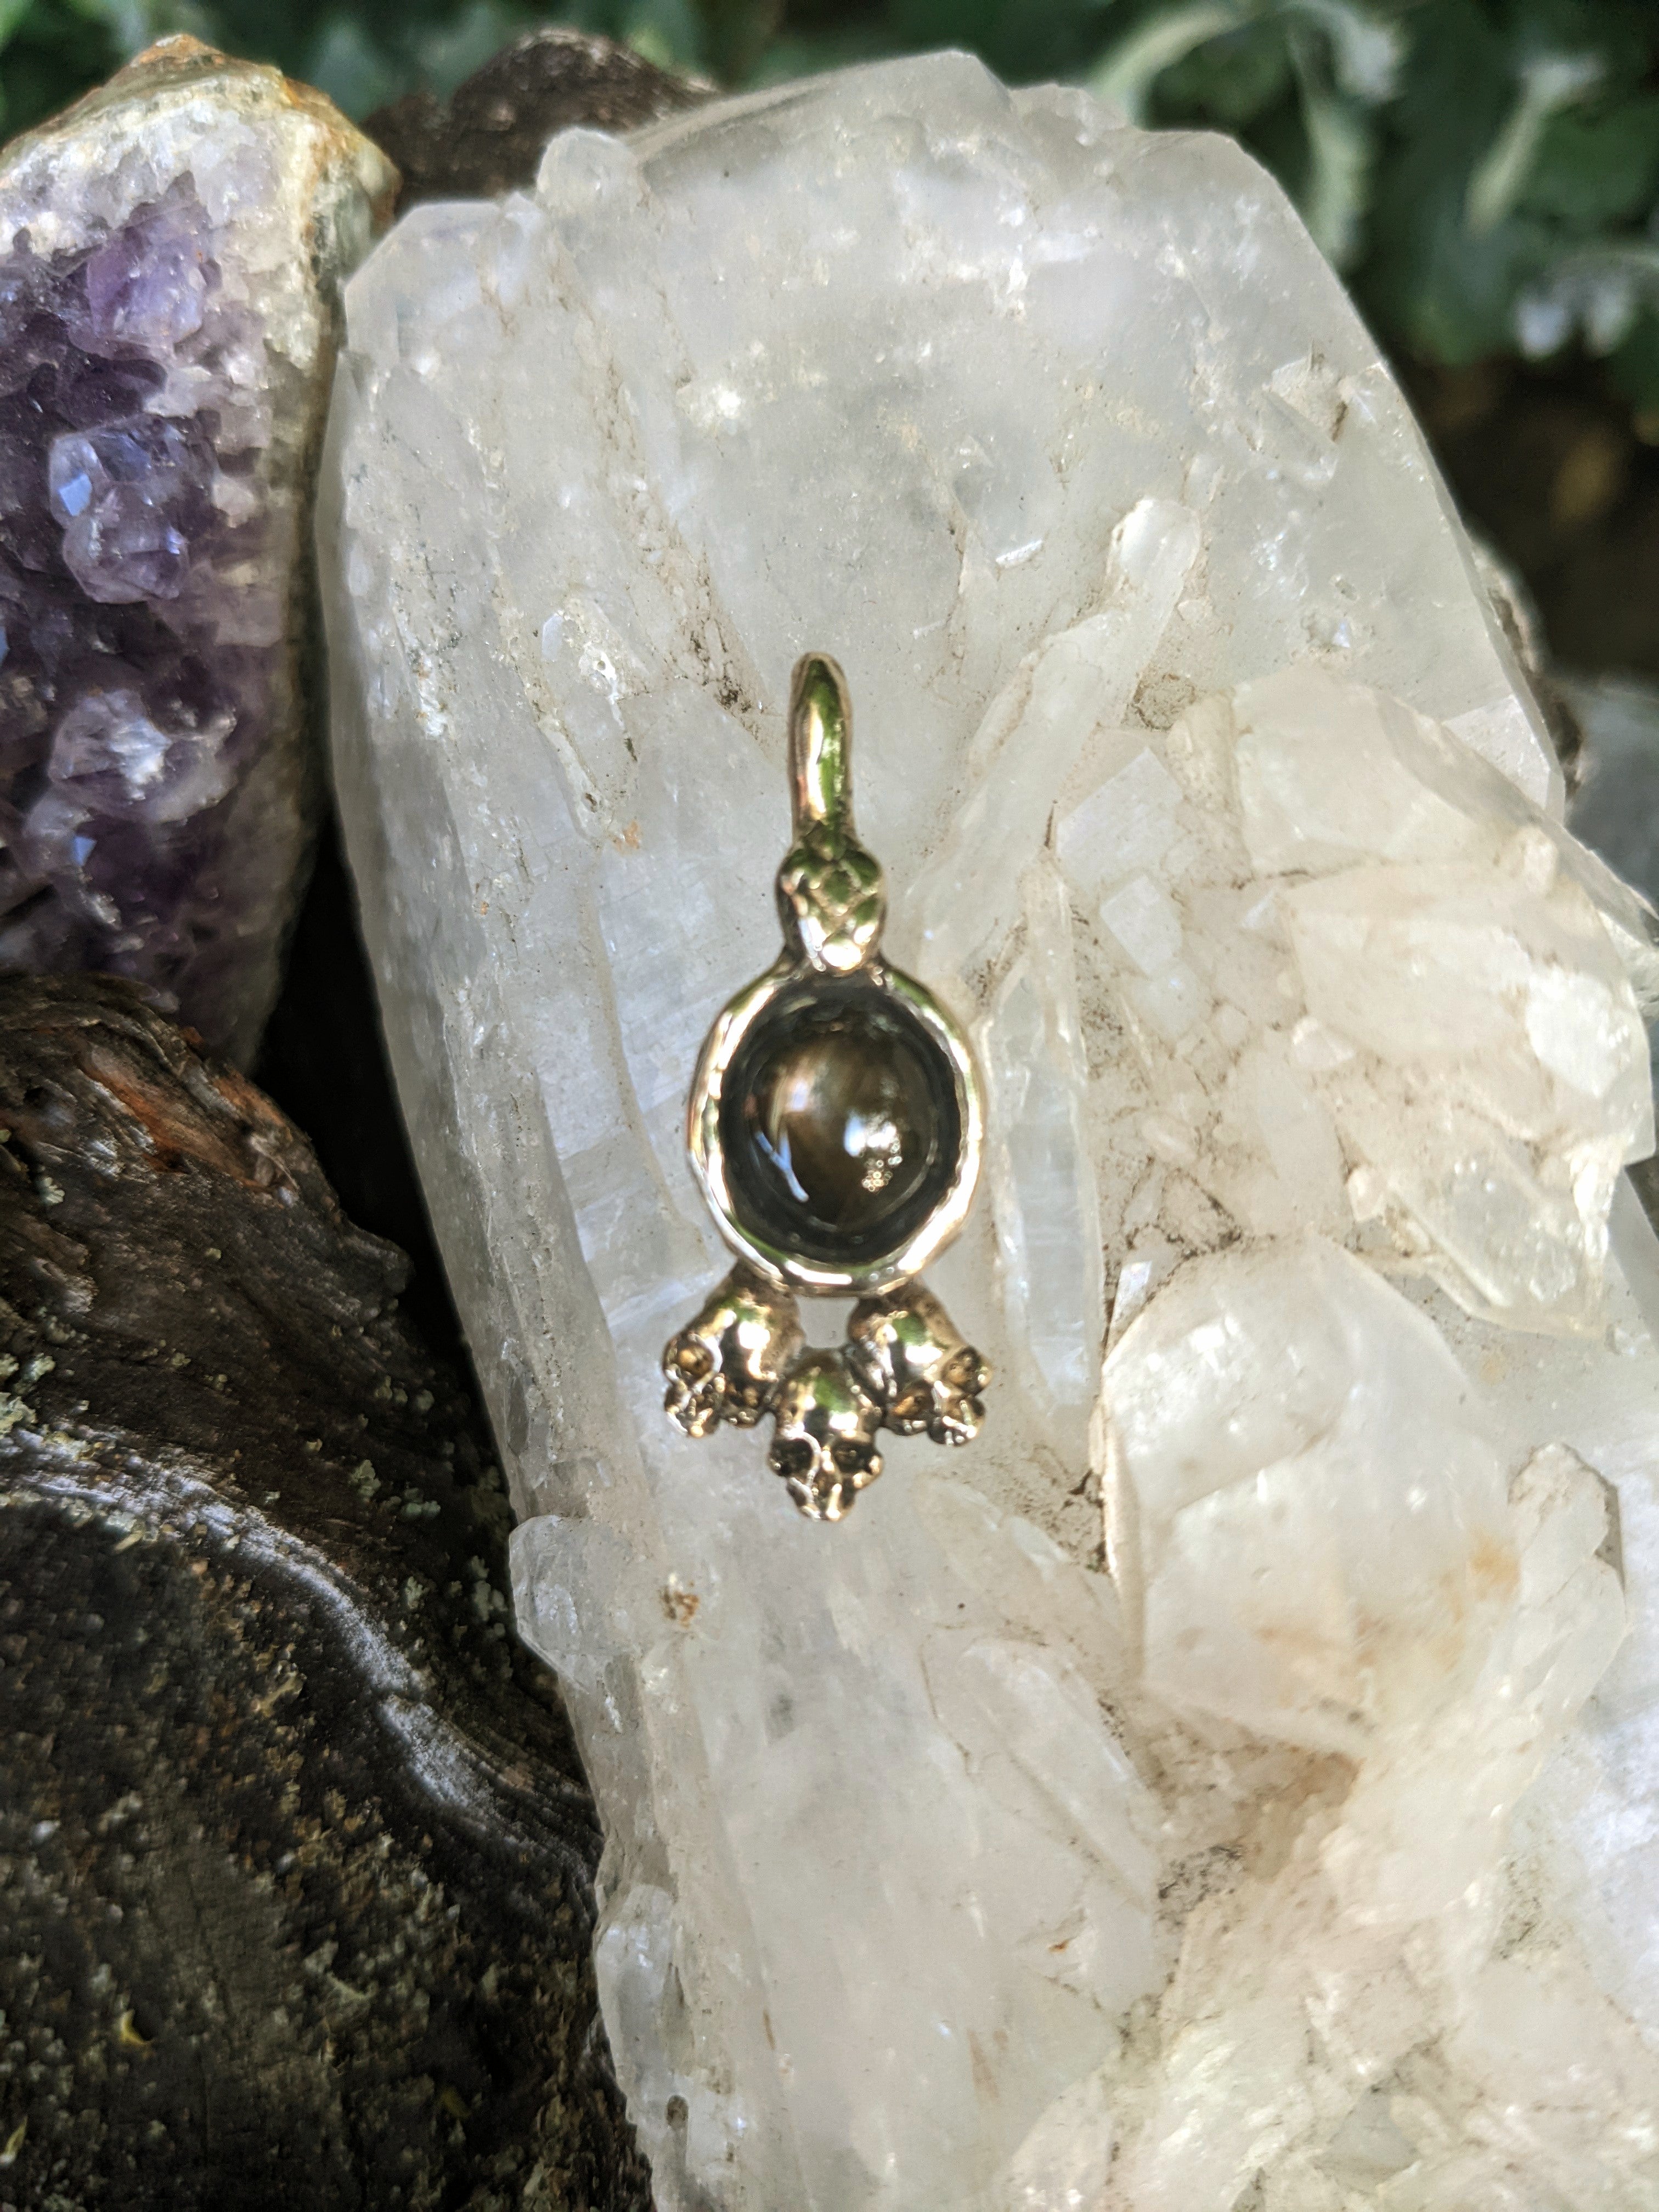 Serpent Hecate, Black Star Sapphire and Bronze.